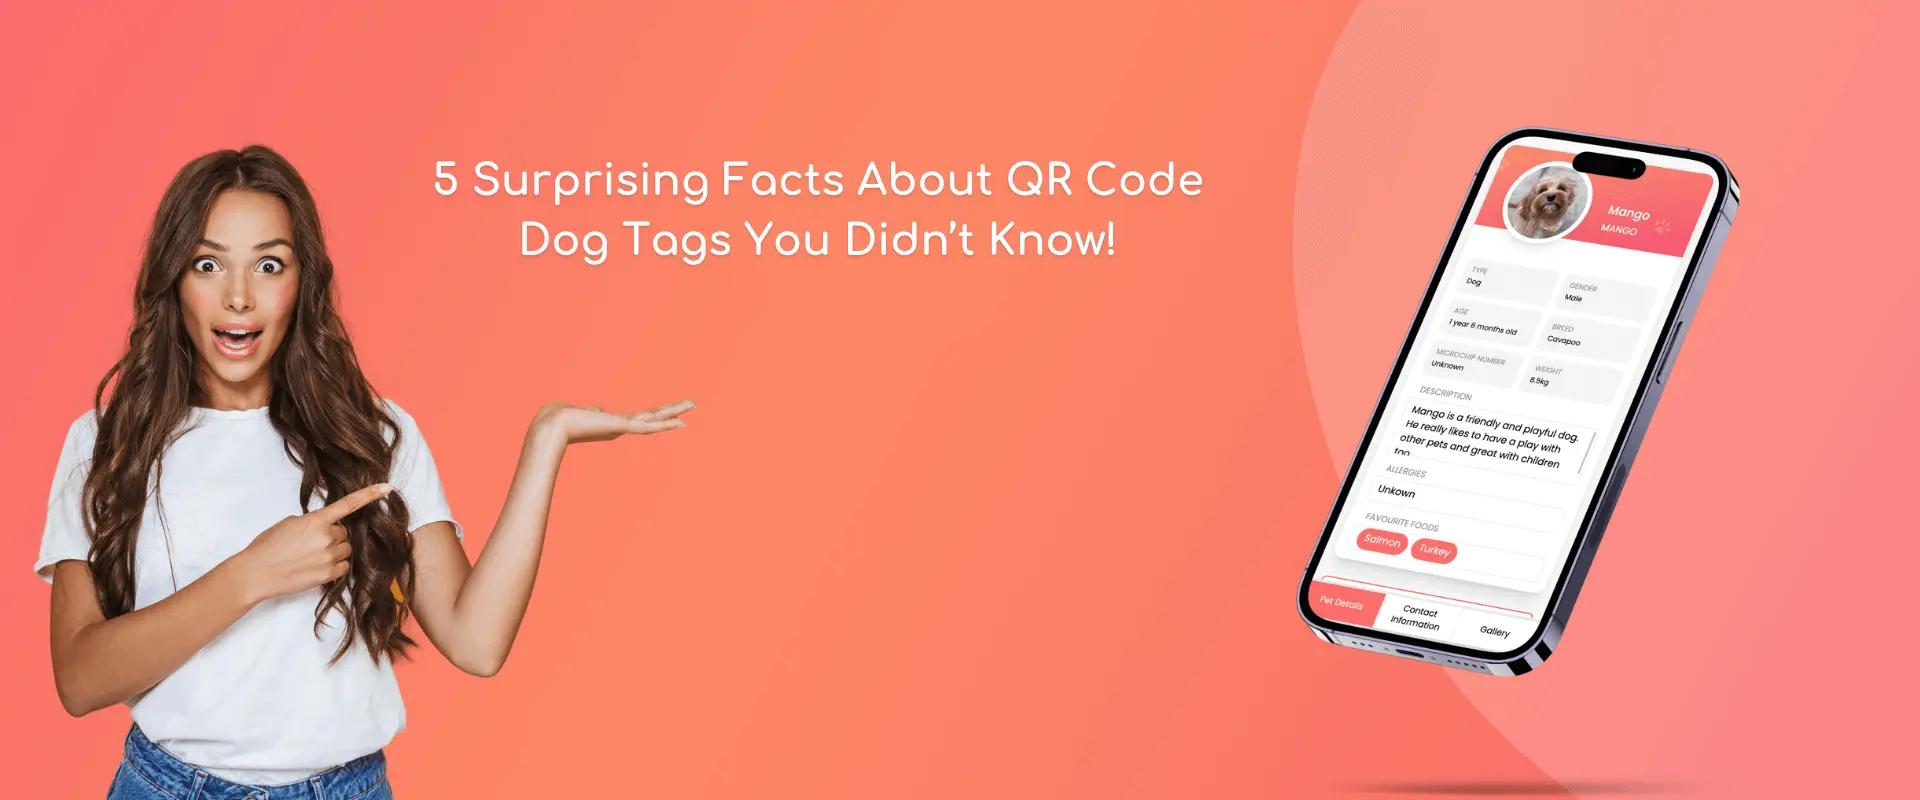 5 Surprising Facts About QR Code Dog Tags You Didn’t Know!